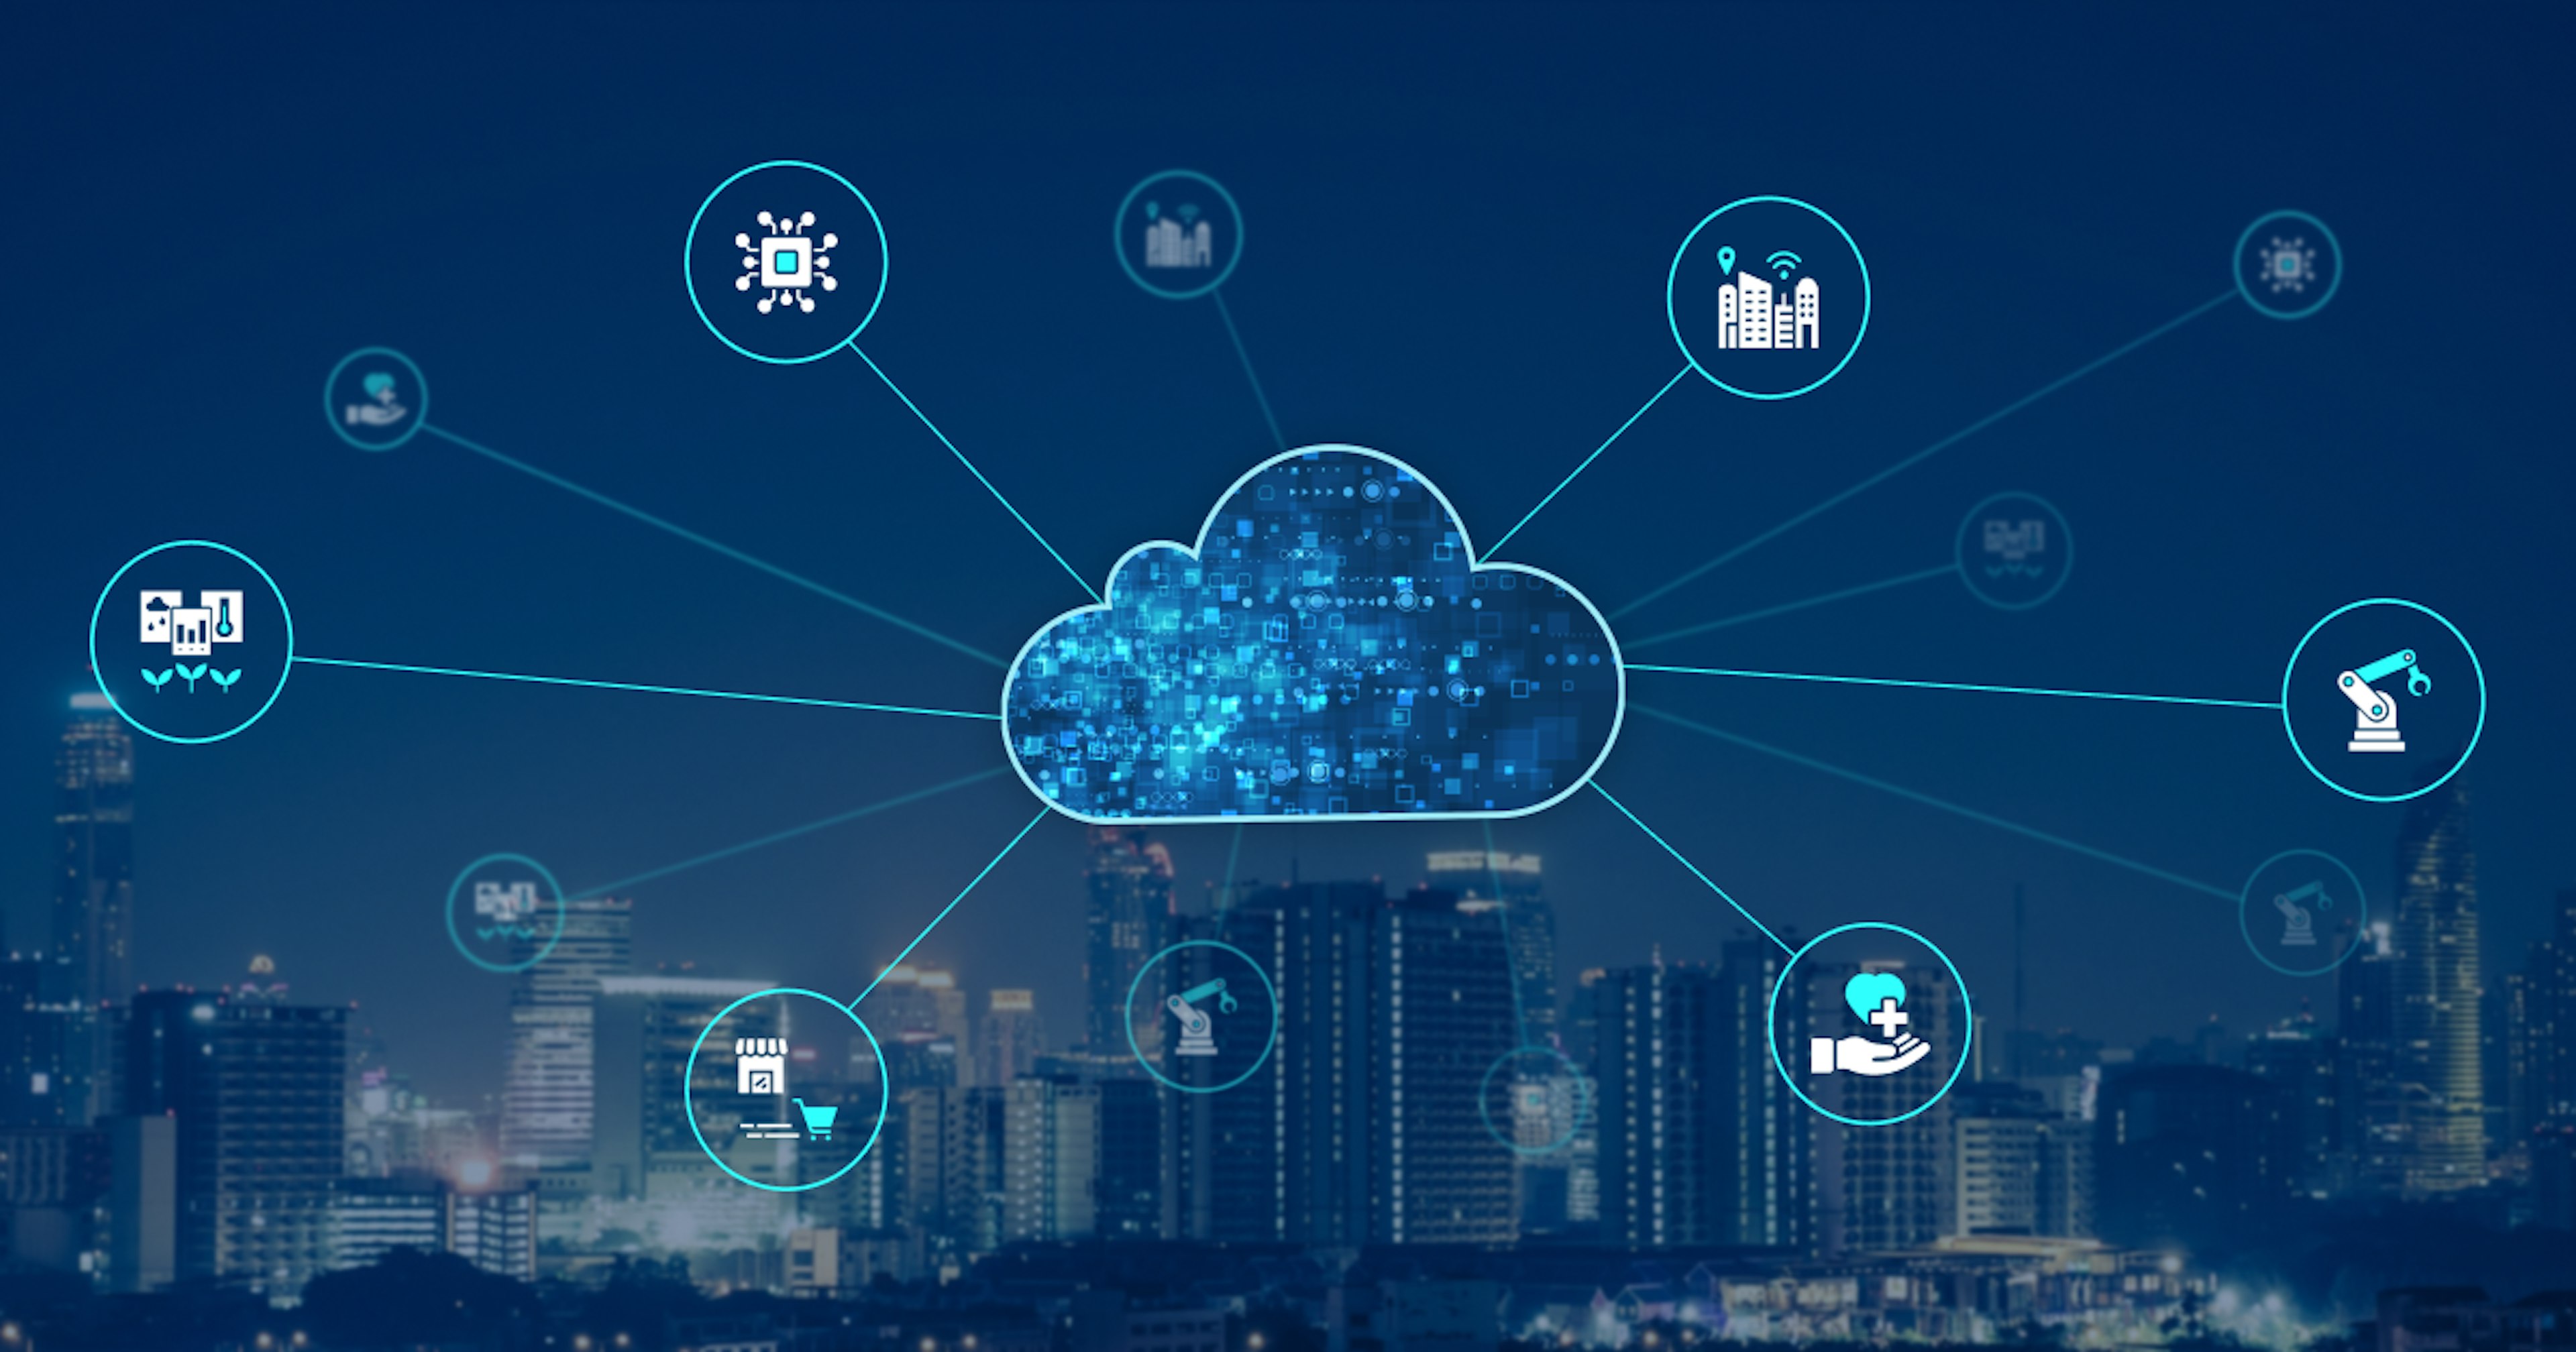 Smart IoT Solutions With Edge Fabric And Edge Computing Technologies